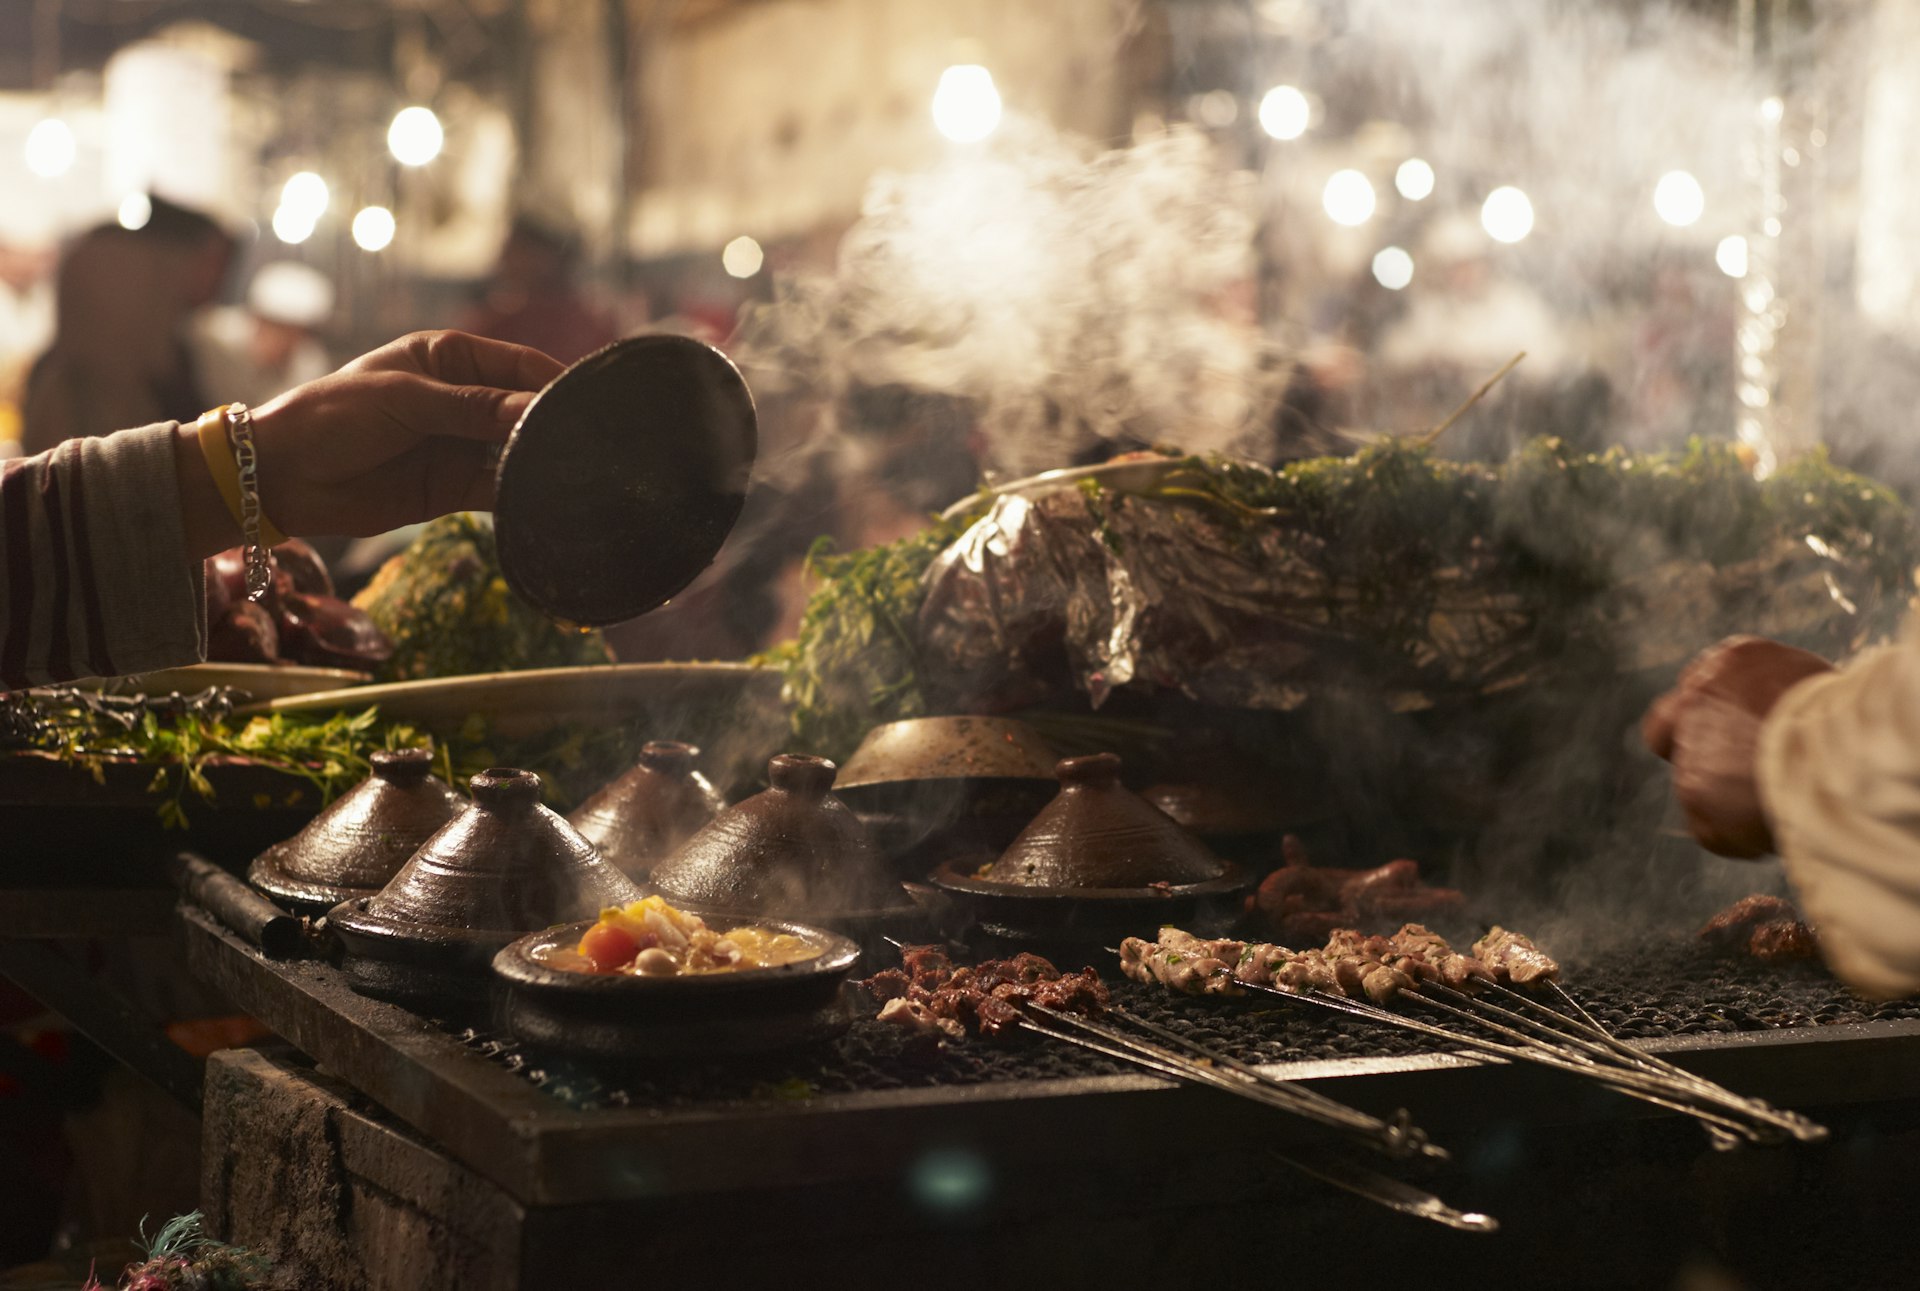 A close-up of a vendor cooking tagine on a grill at a street market in Marrakesh